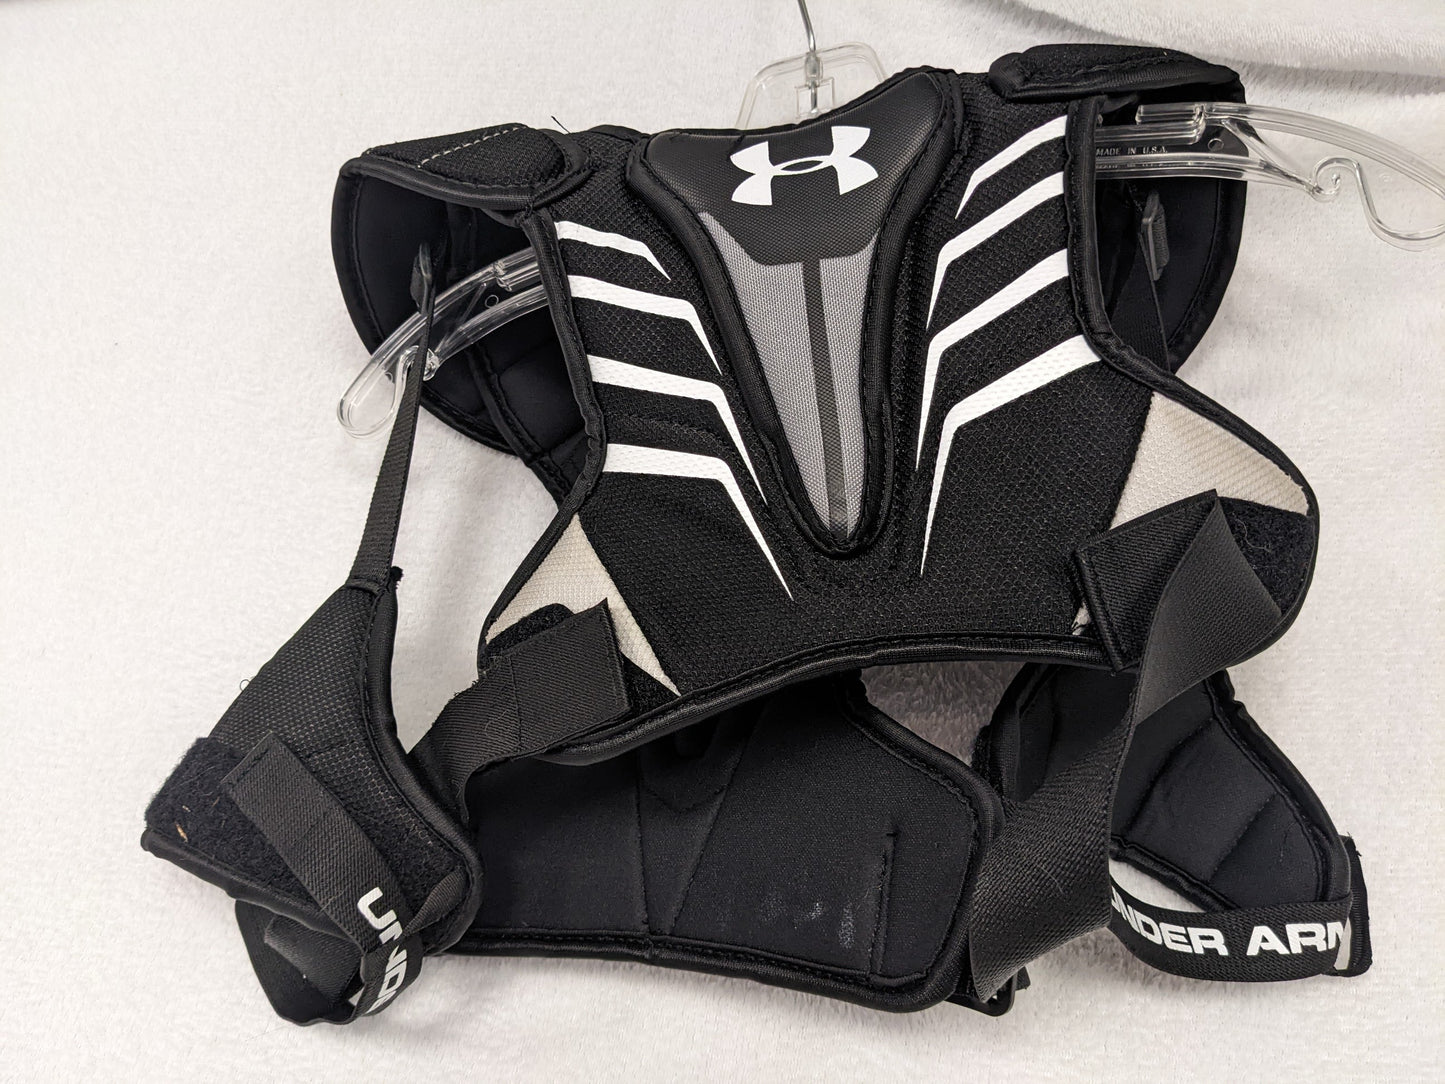 Under Armour Youth Lacrosse Shoulder Pads Chest Protection Size Youth Small Color Black Condition Used